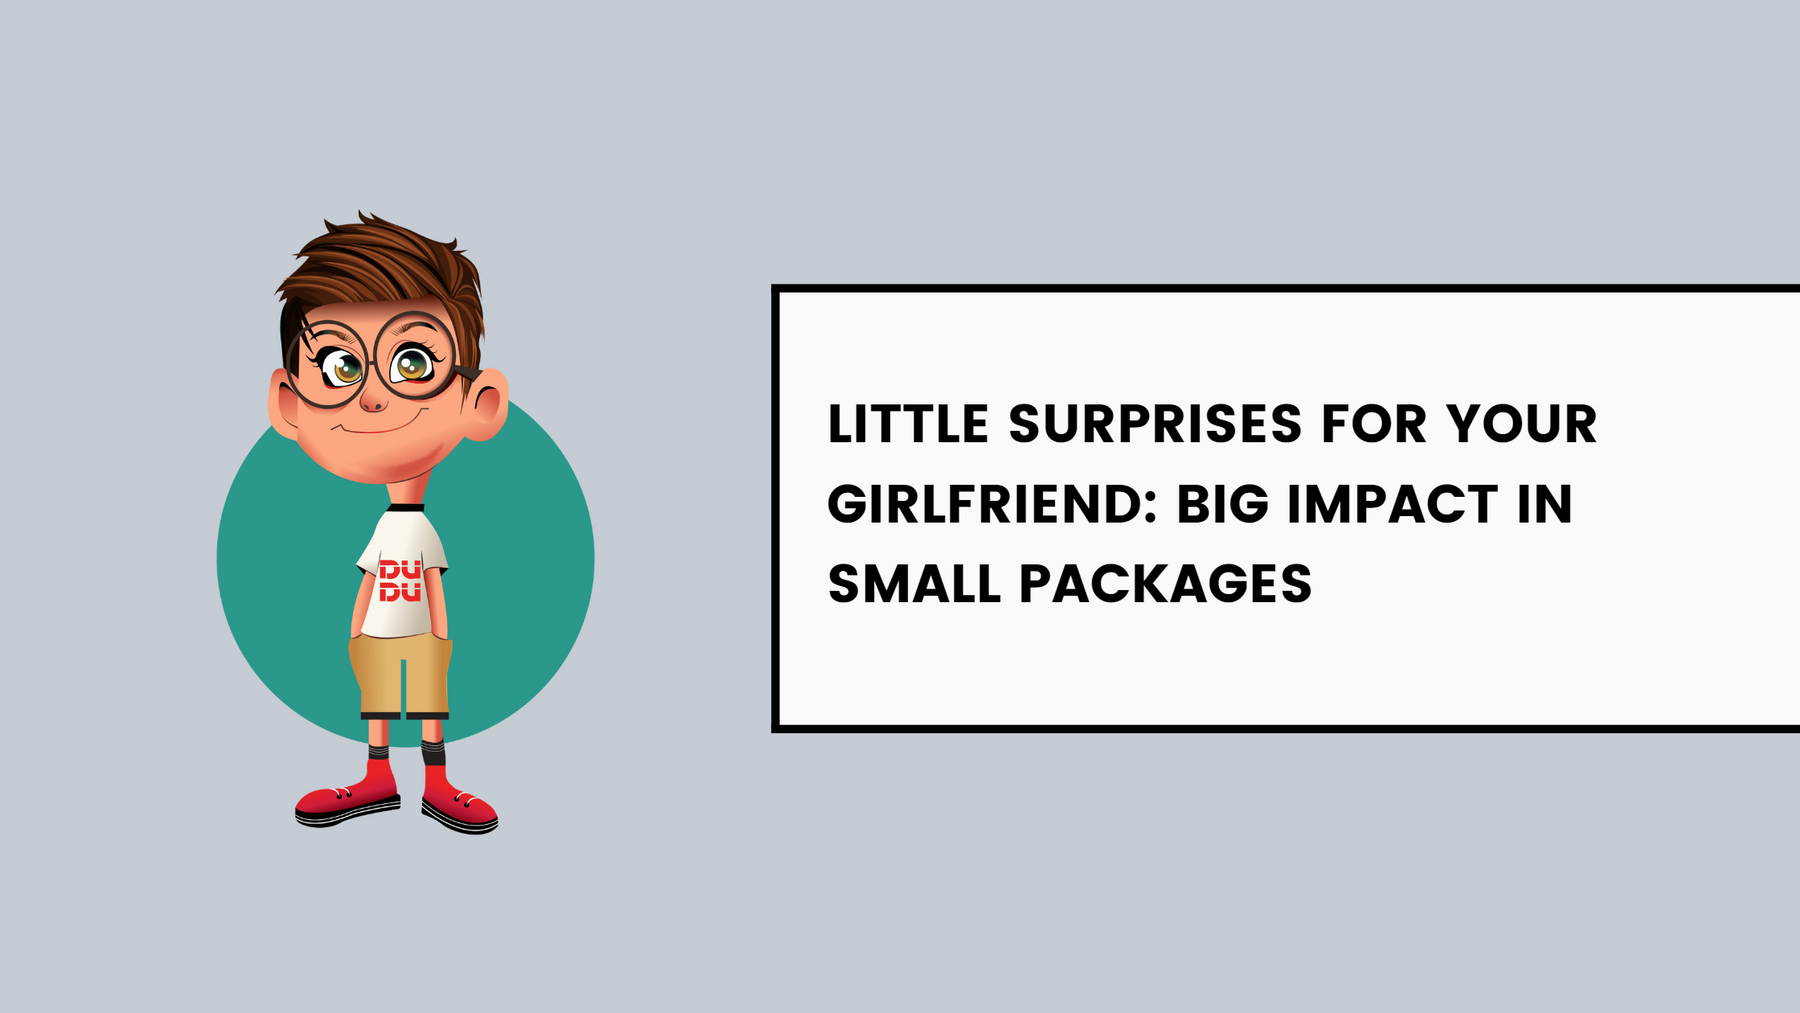 Little Surprises For Your Girlfriend: Big Impact In Small Packages